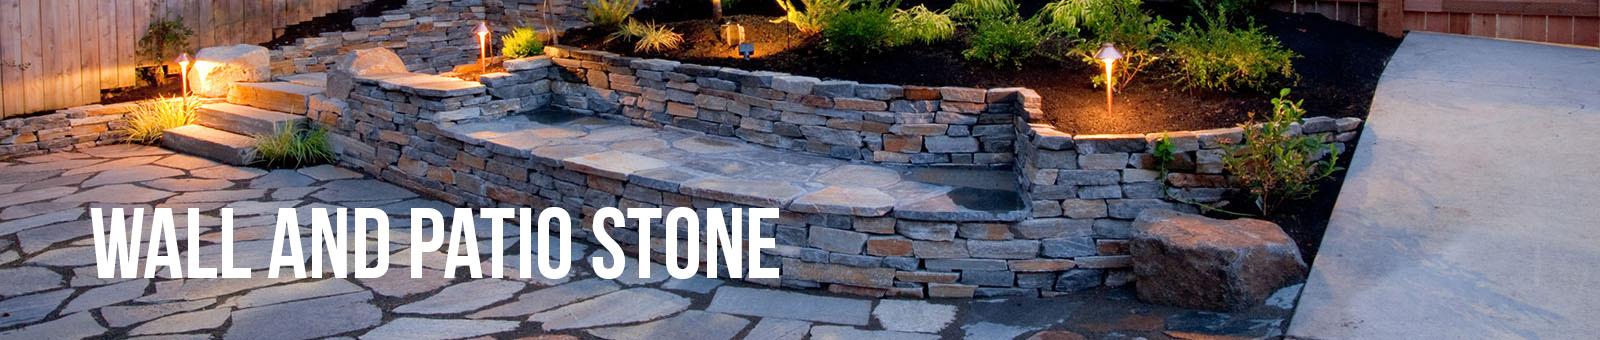 Wall and Patio Stone